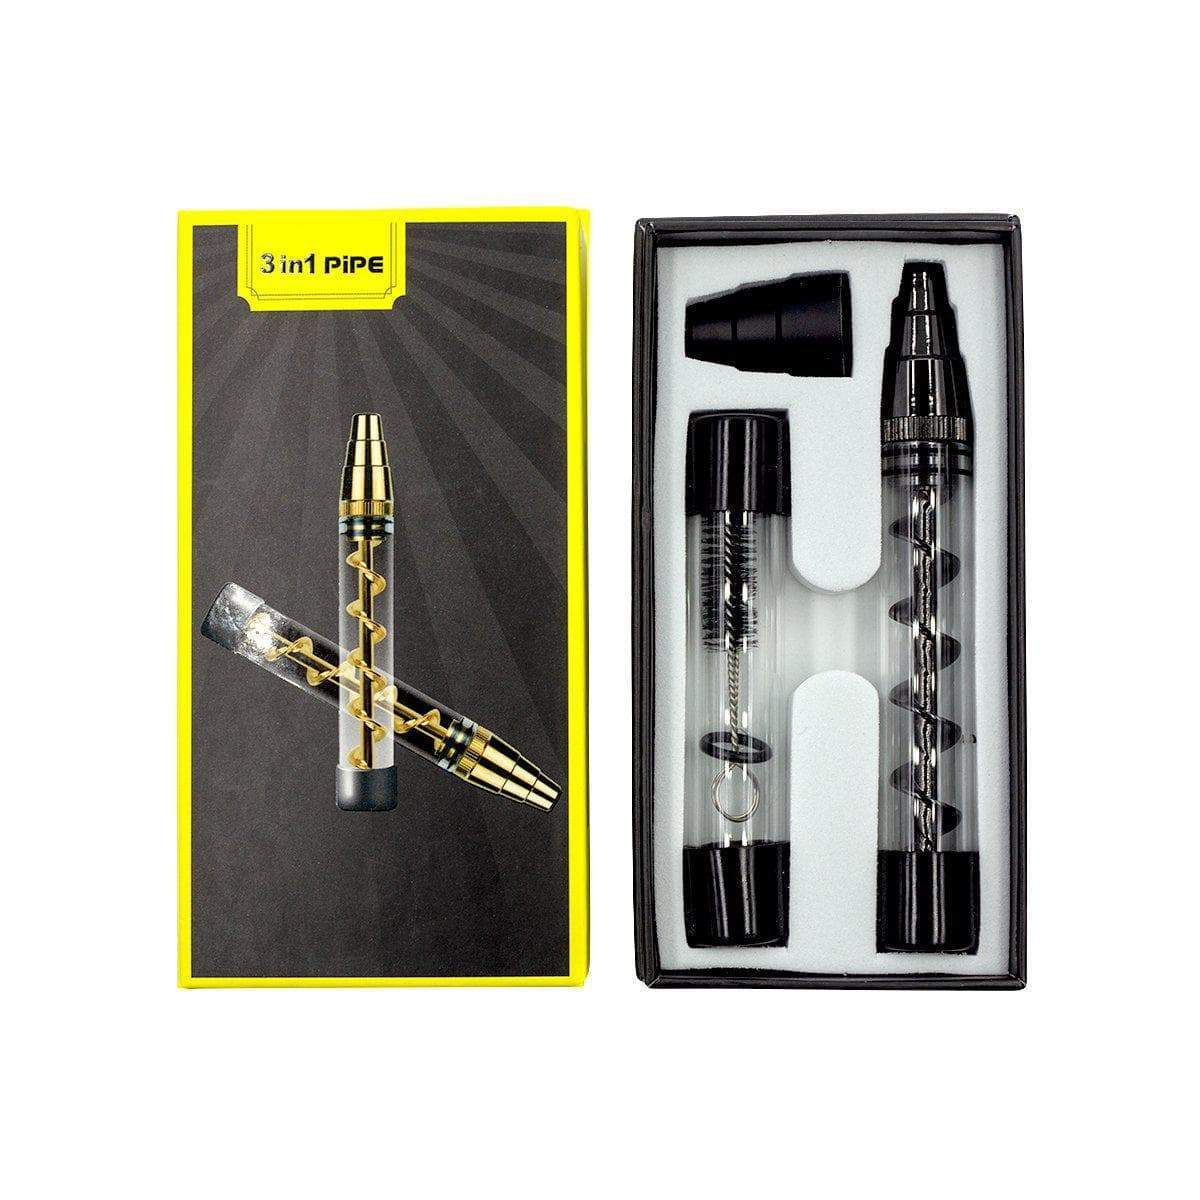 Useful glass blunt smoking accessory with pen shape with unique swirling design in a box